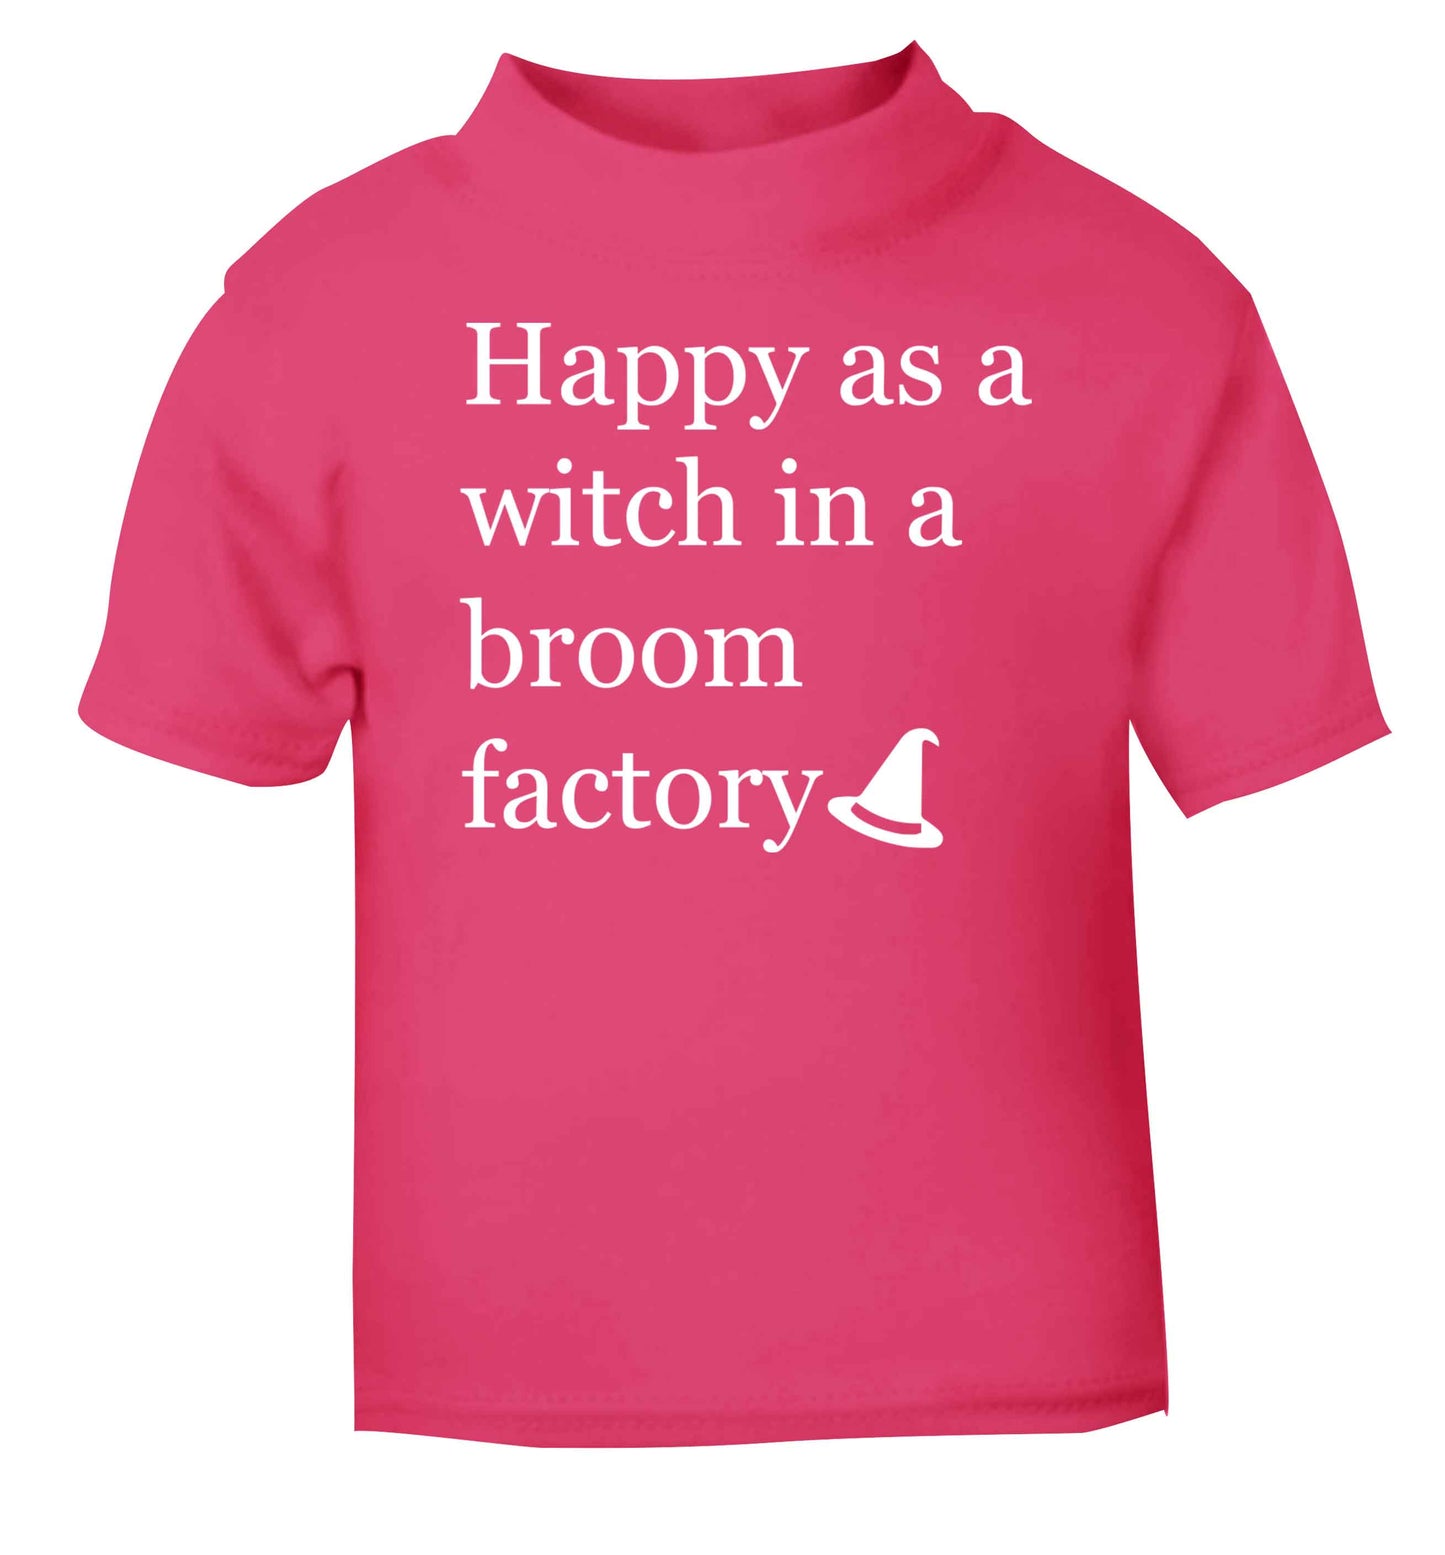 Happy as a witch in a broom factory pink baby toddler Tshirt 2 Years